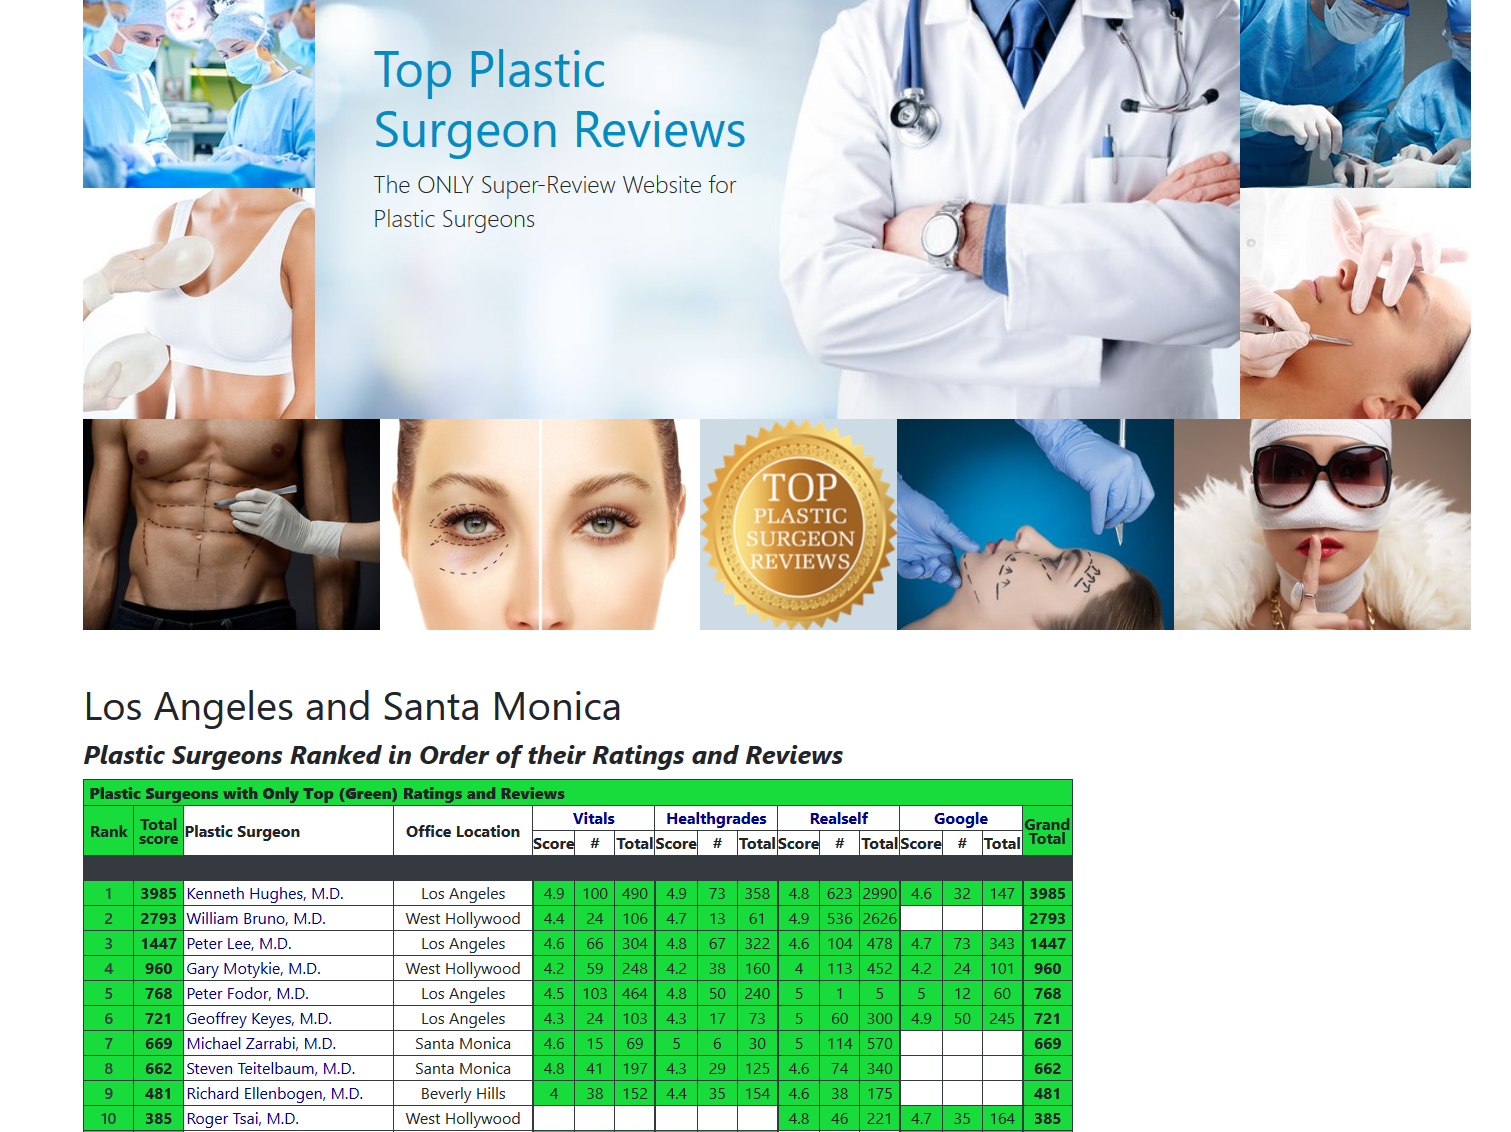 Dr. Kenneth Hughes Reviewed as Top Plastic Surgeon in Los Angeles